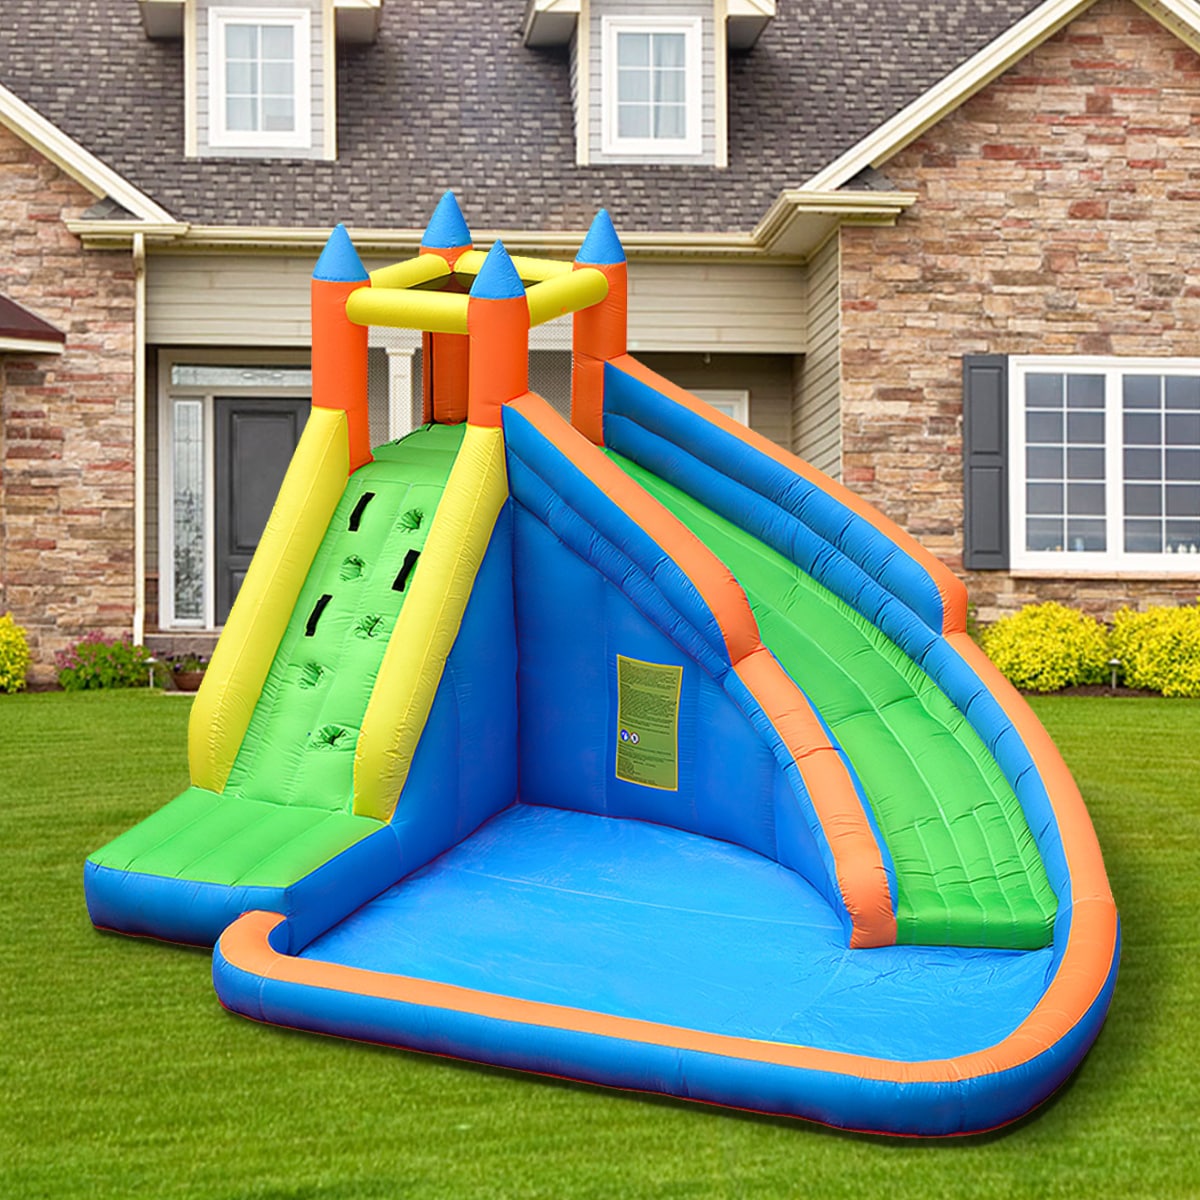 Kids Inflatable Bouncy Castle Jumper House Water Pool Slide Outdoor Playground 